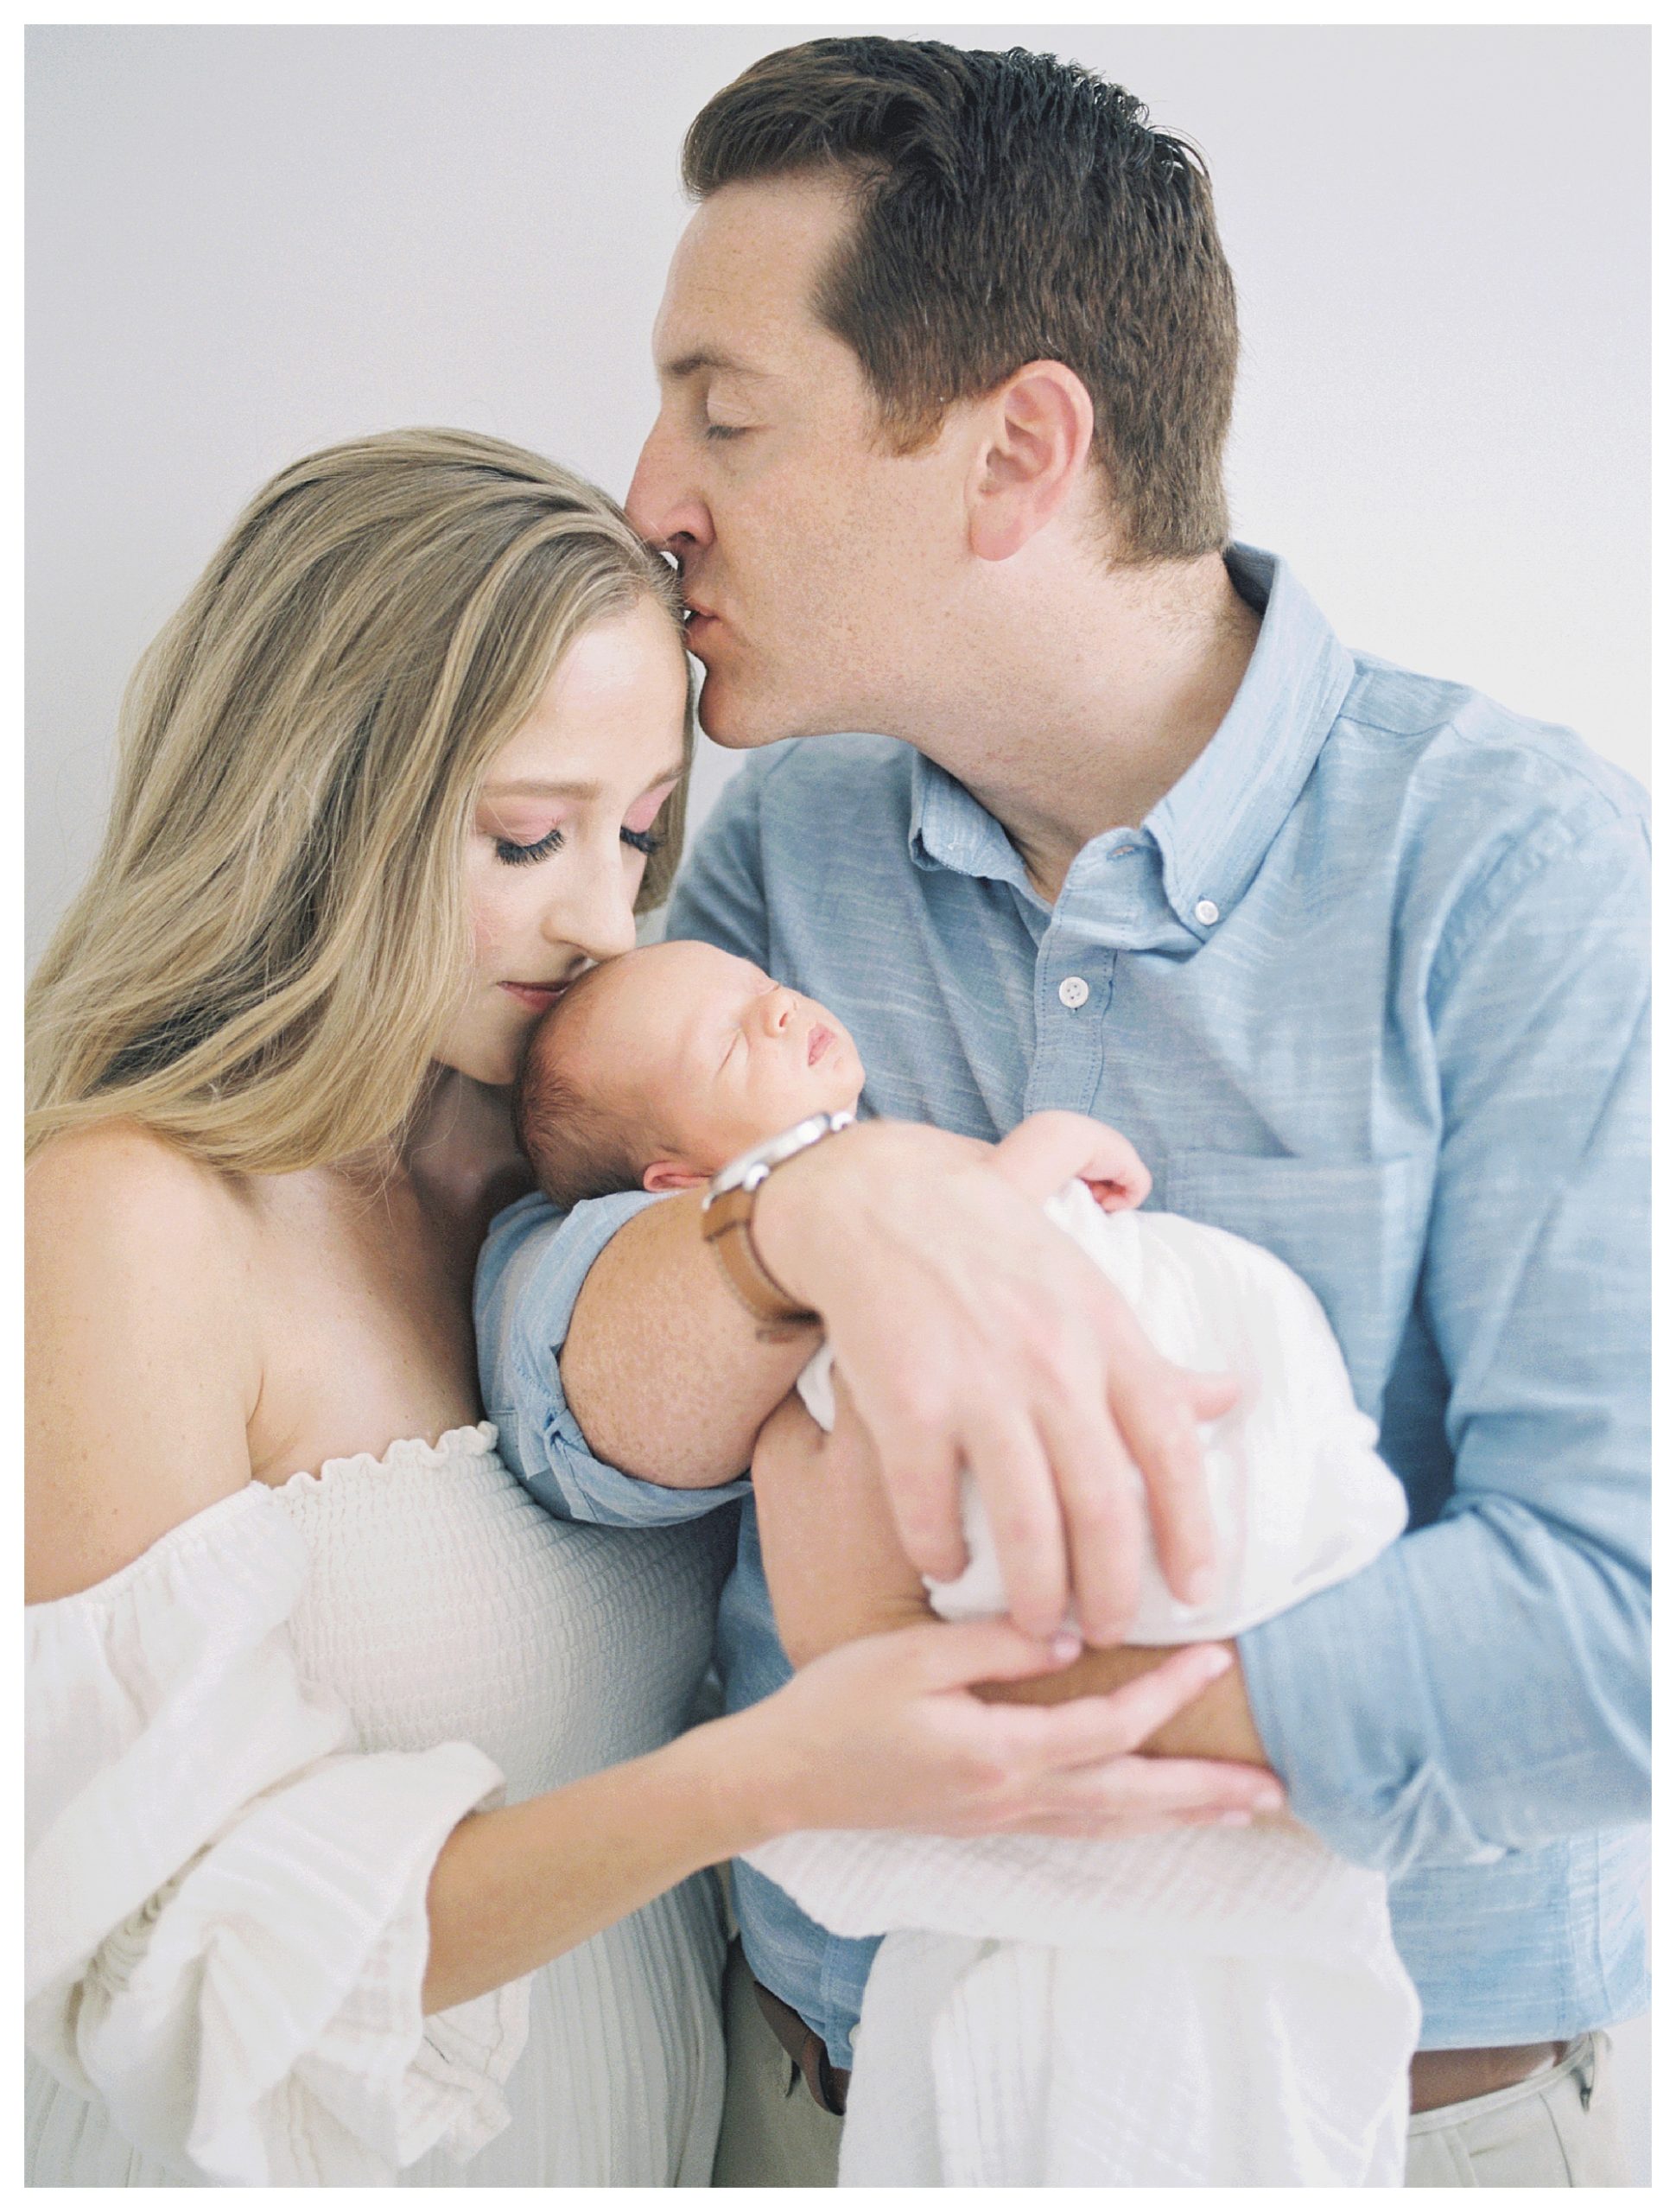 New father kisses his wife's forehead as they hold their newborn baby during their DC newborn session.